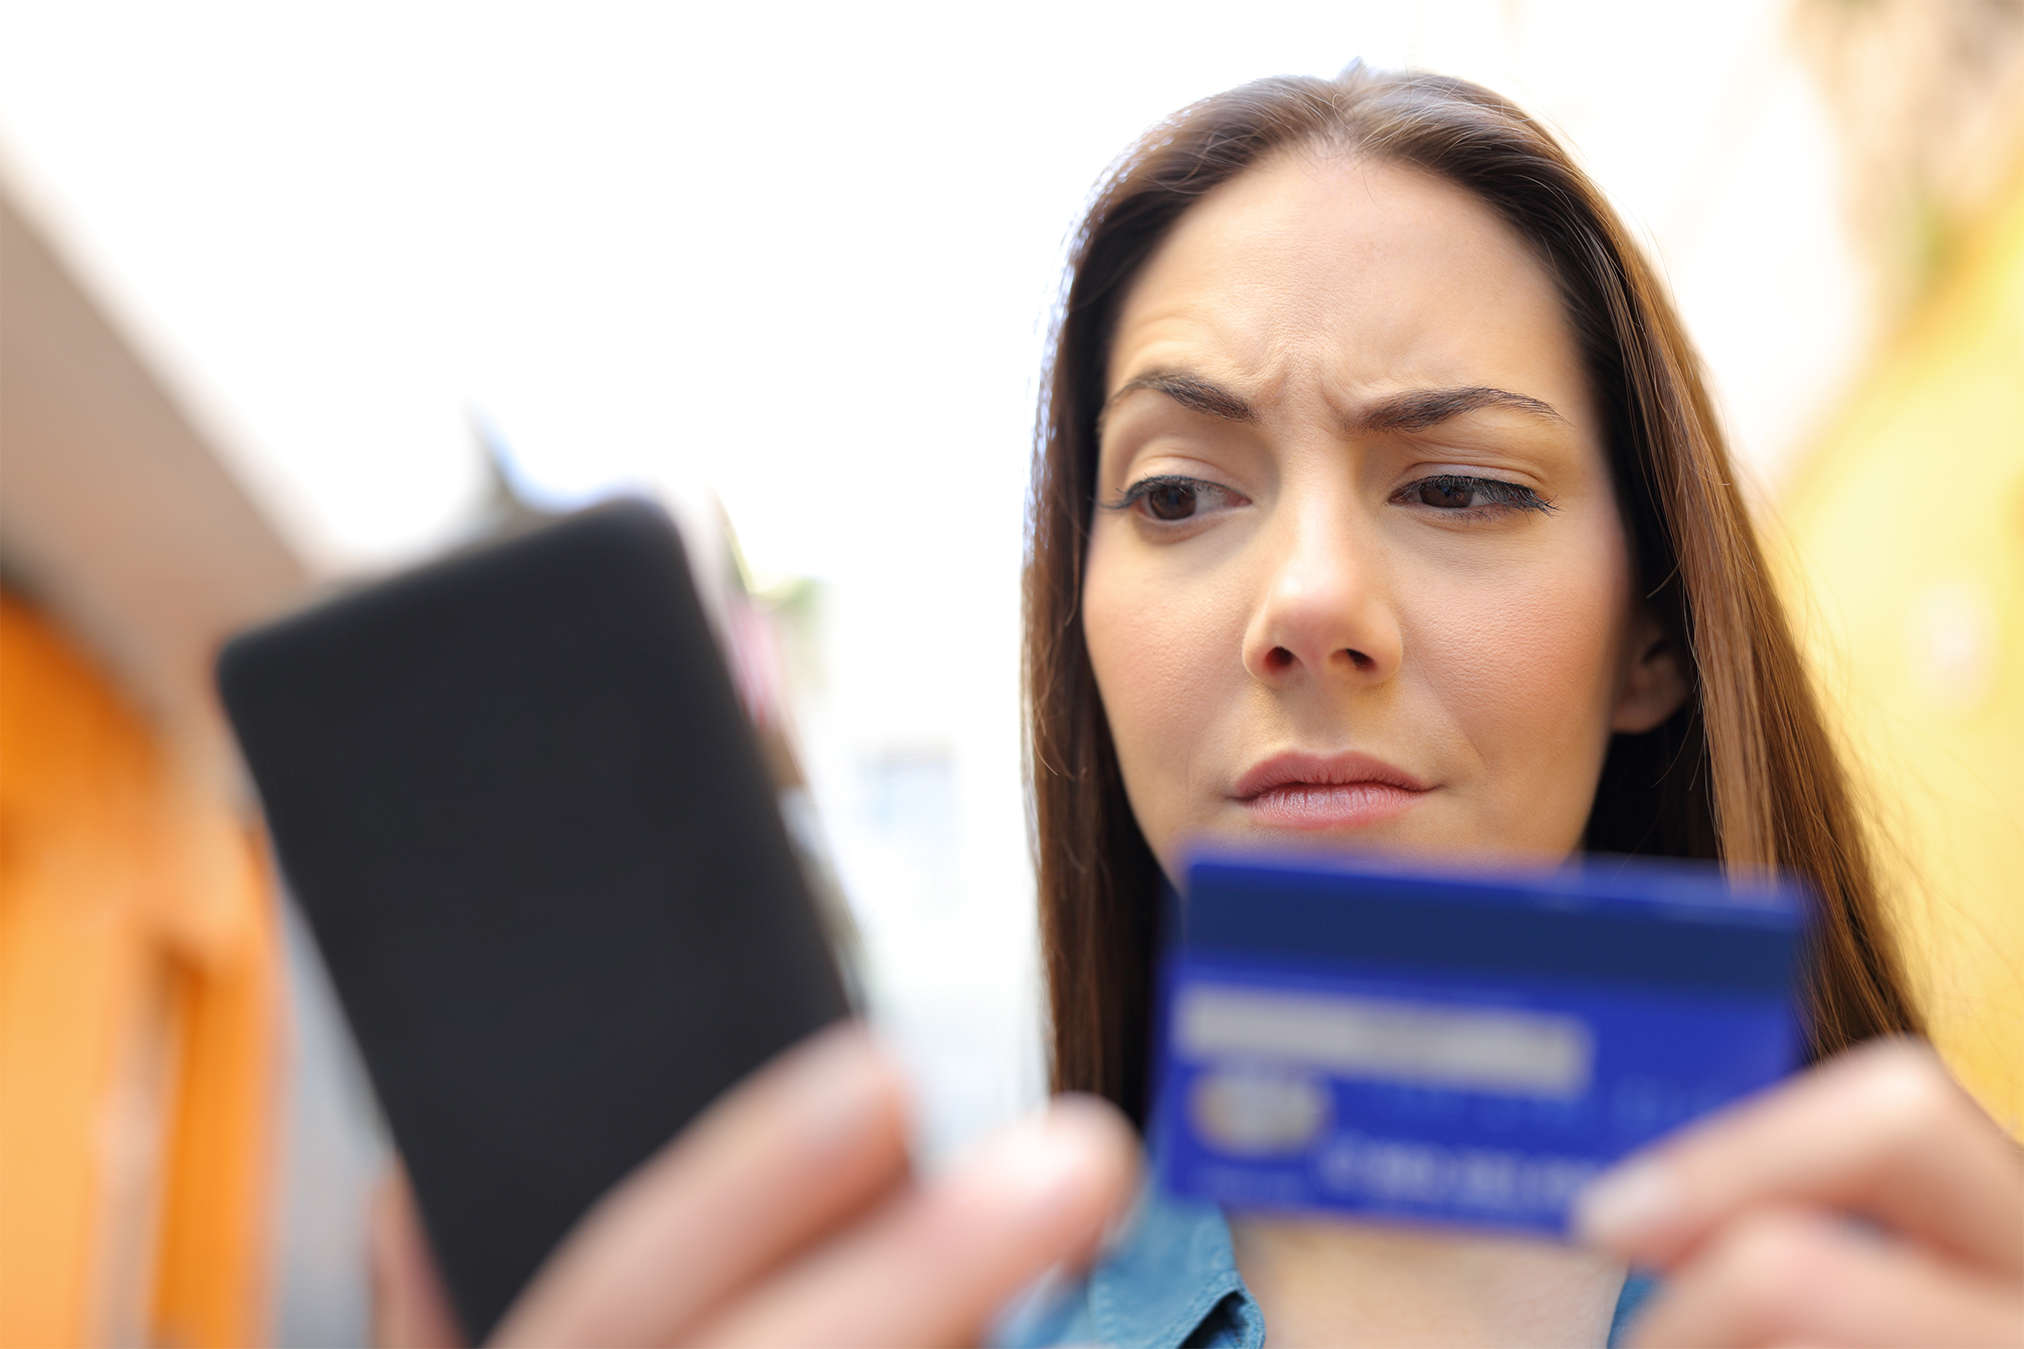 A woman suspecting that her credit card information has been compromised reads an article on her phone about how to prevent credit card fraud.